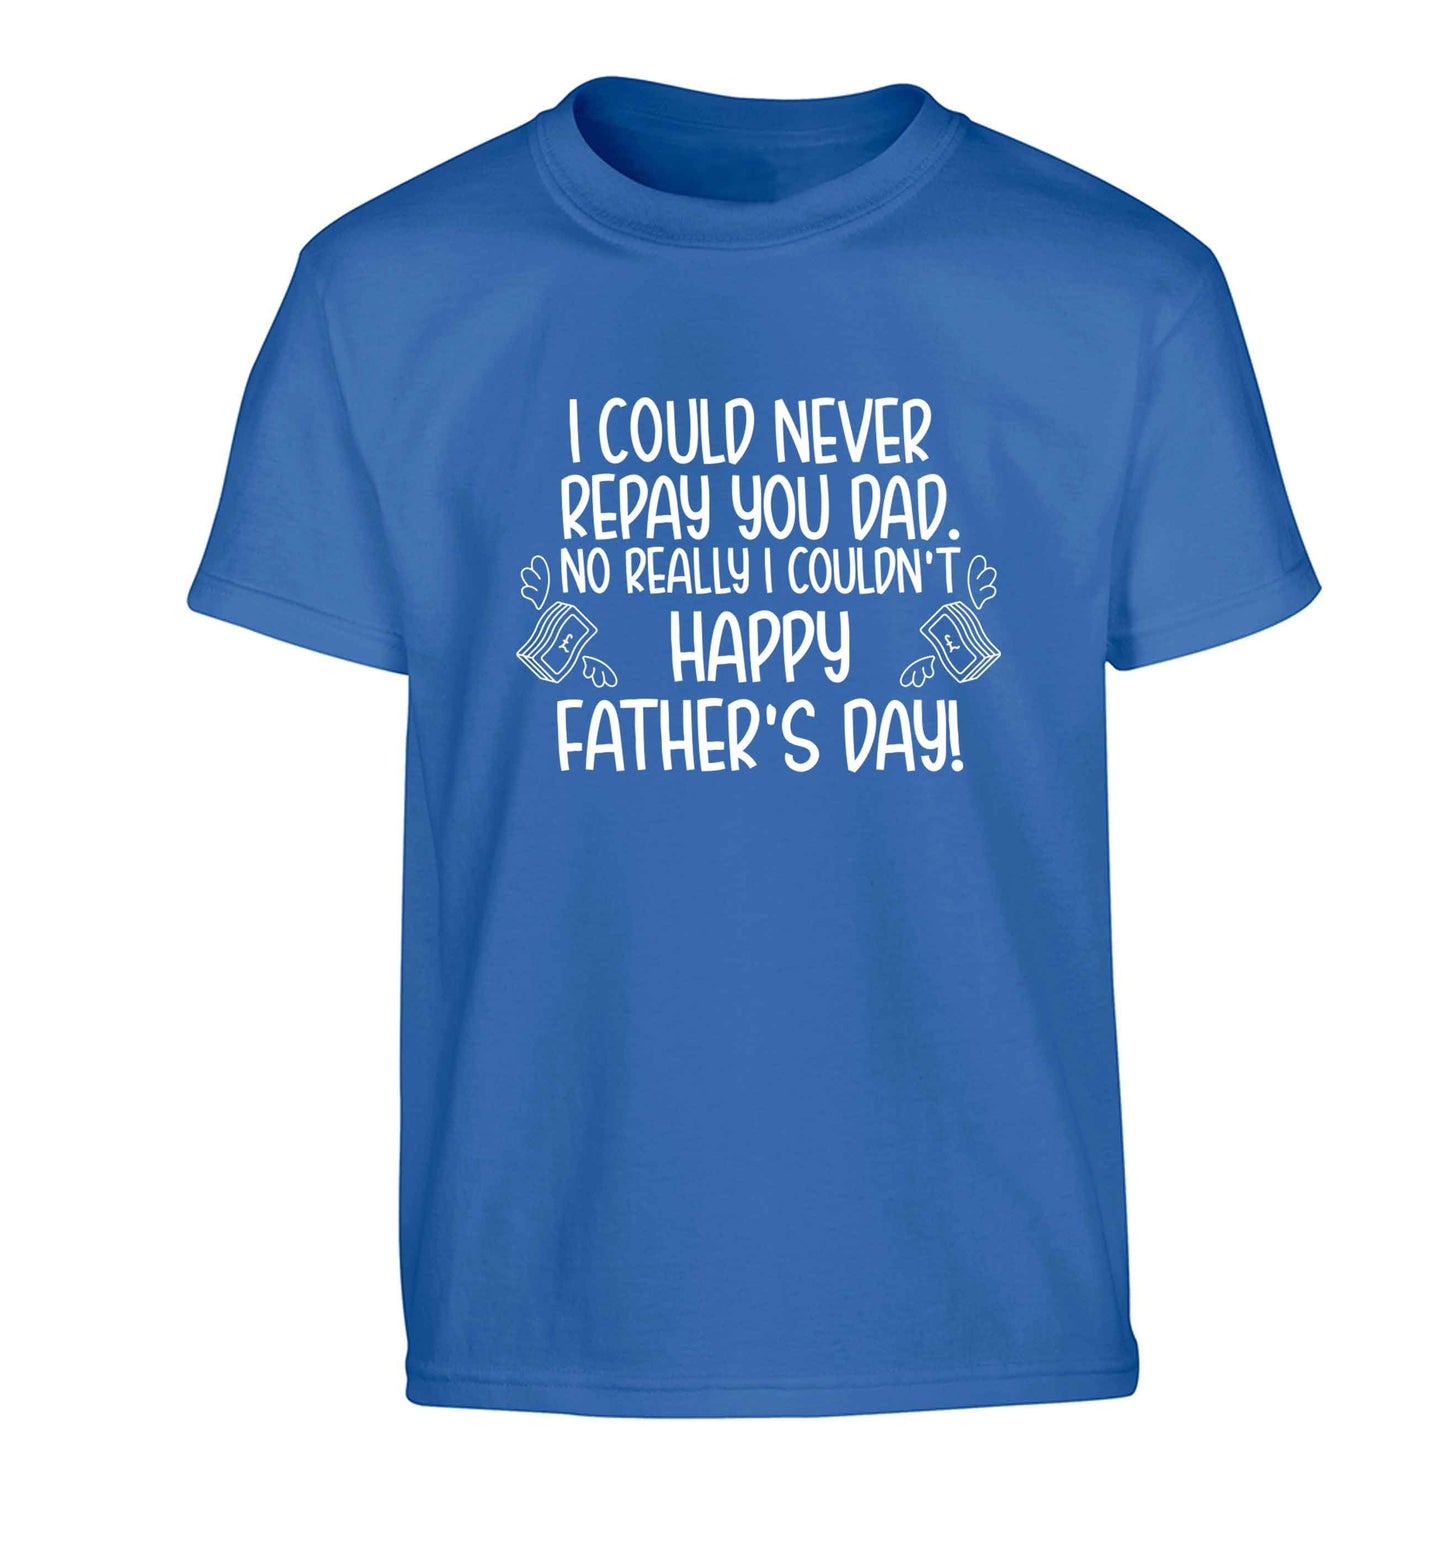 I could never repay you dad. No I really couldn't happy Father's day! Children's blue Tshirt 12-13 Years